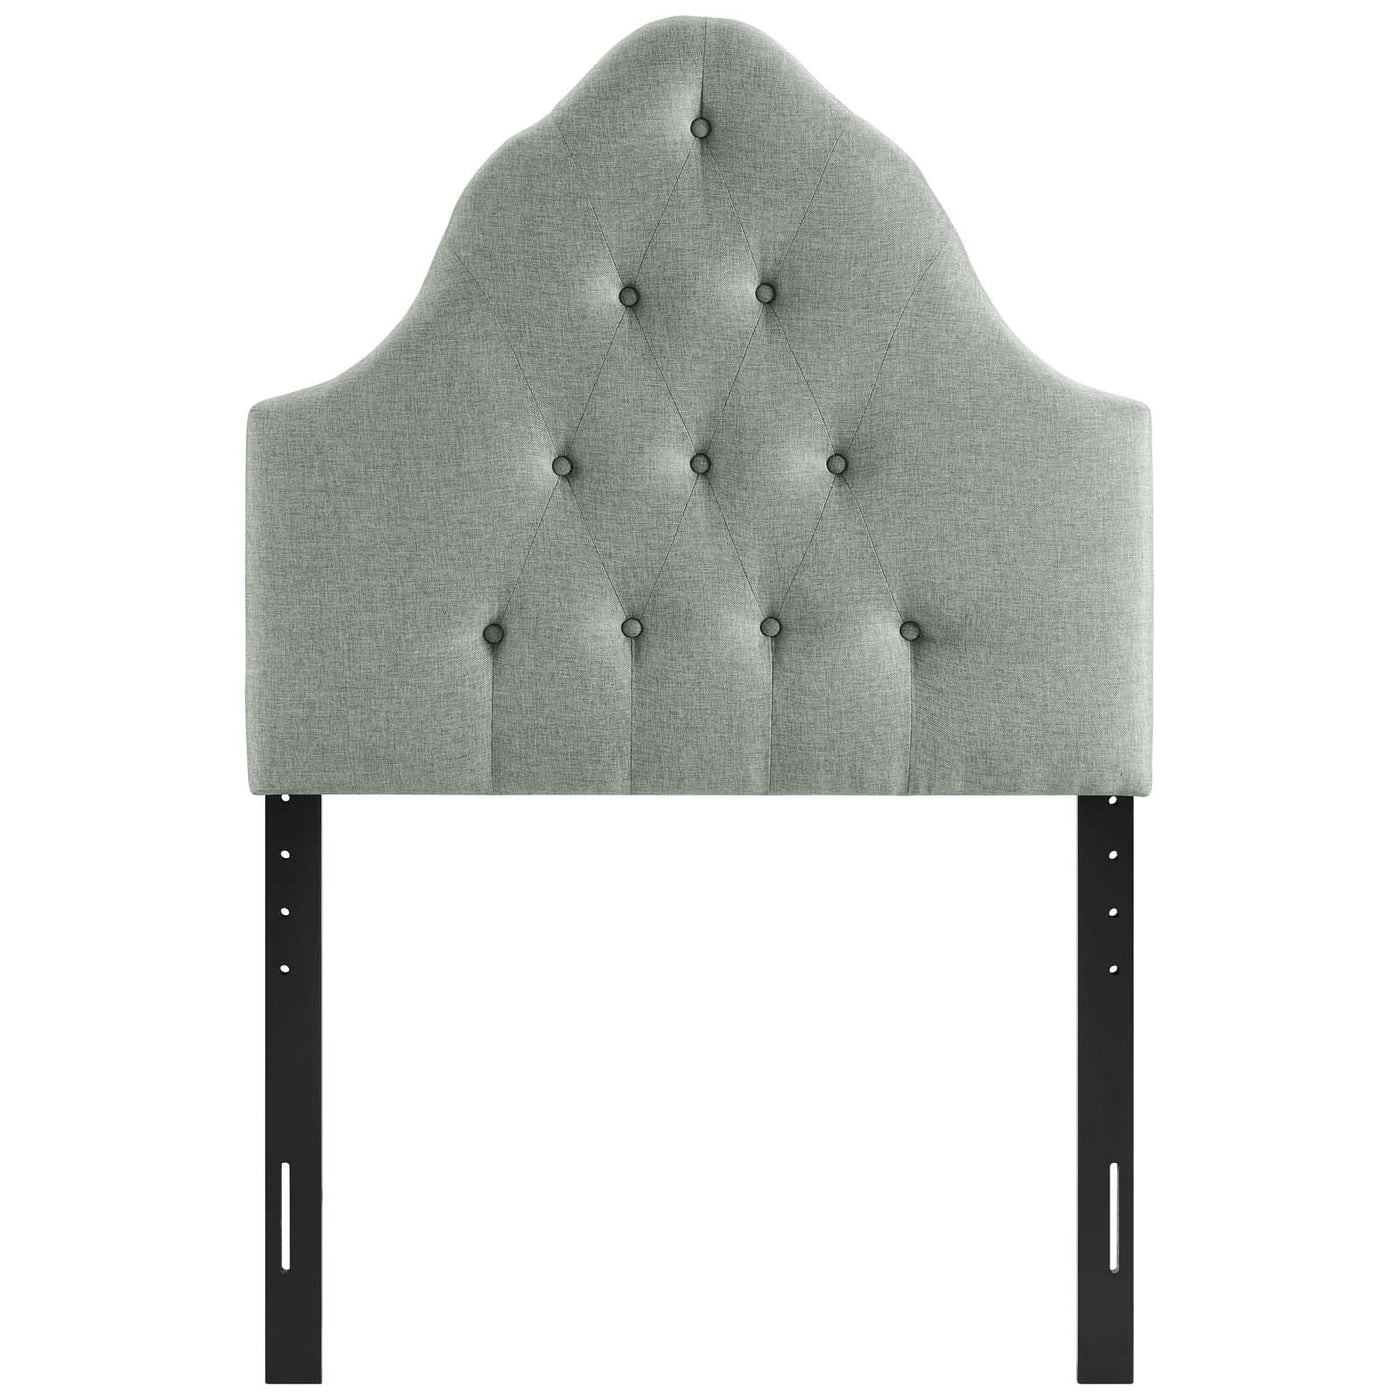 Sovereign Twin Upholstered Fabric Headboard